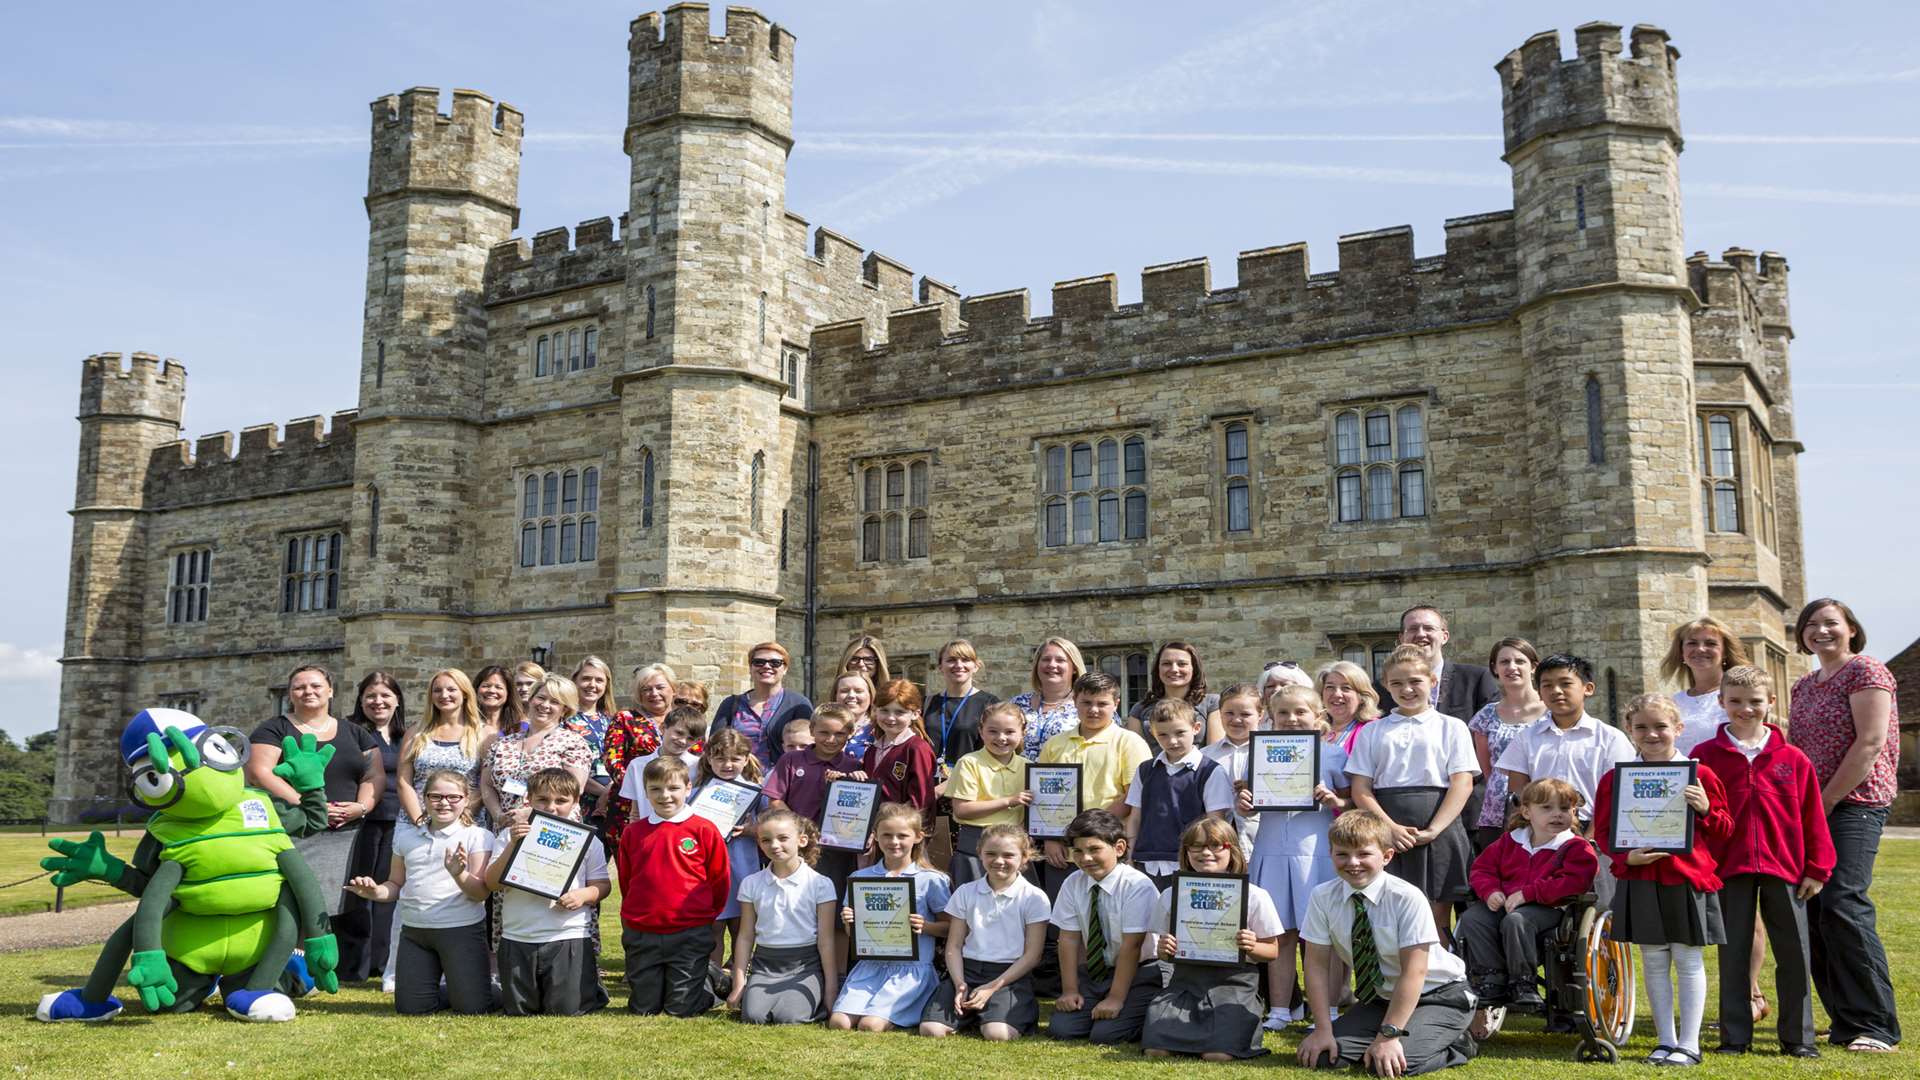 Buster Bug celebrates youngsters getting the reading bug. Pictured here with the winners and sponsors of the Kent Literacy Awards in June at Leeds Castle.